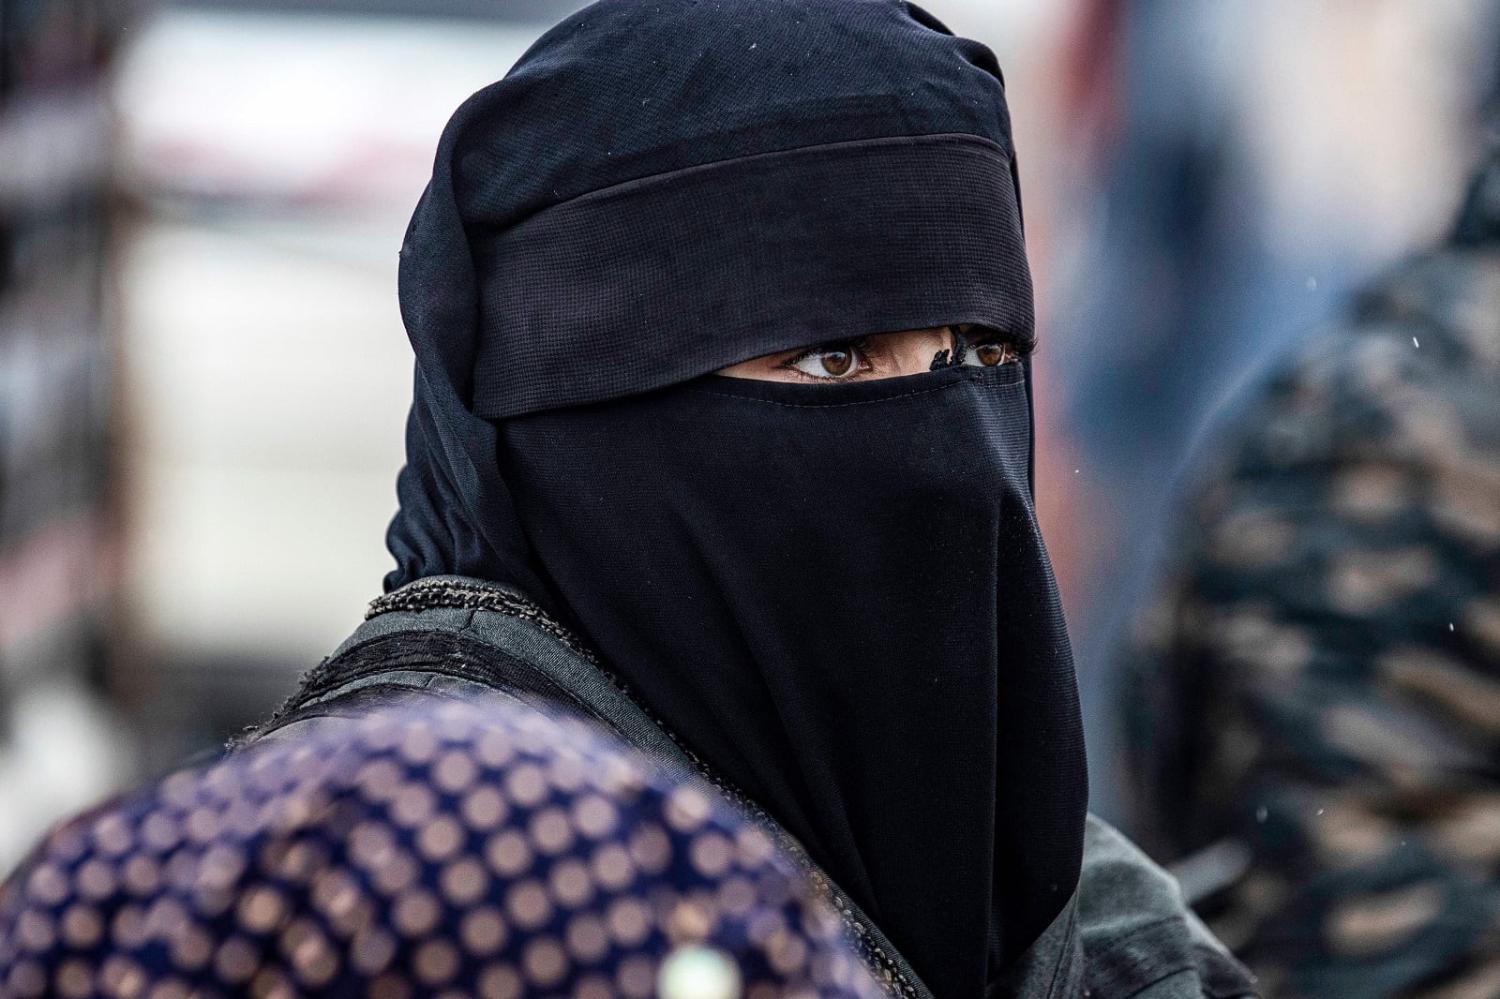 A woman looks on during the release of persons suspected of being related to Islamic State group fighters, al-Hol camp, Syria (Delil Souleiman/AFP via Getty Images)